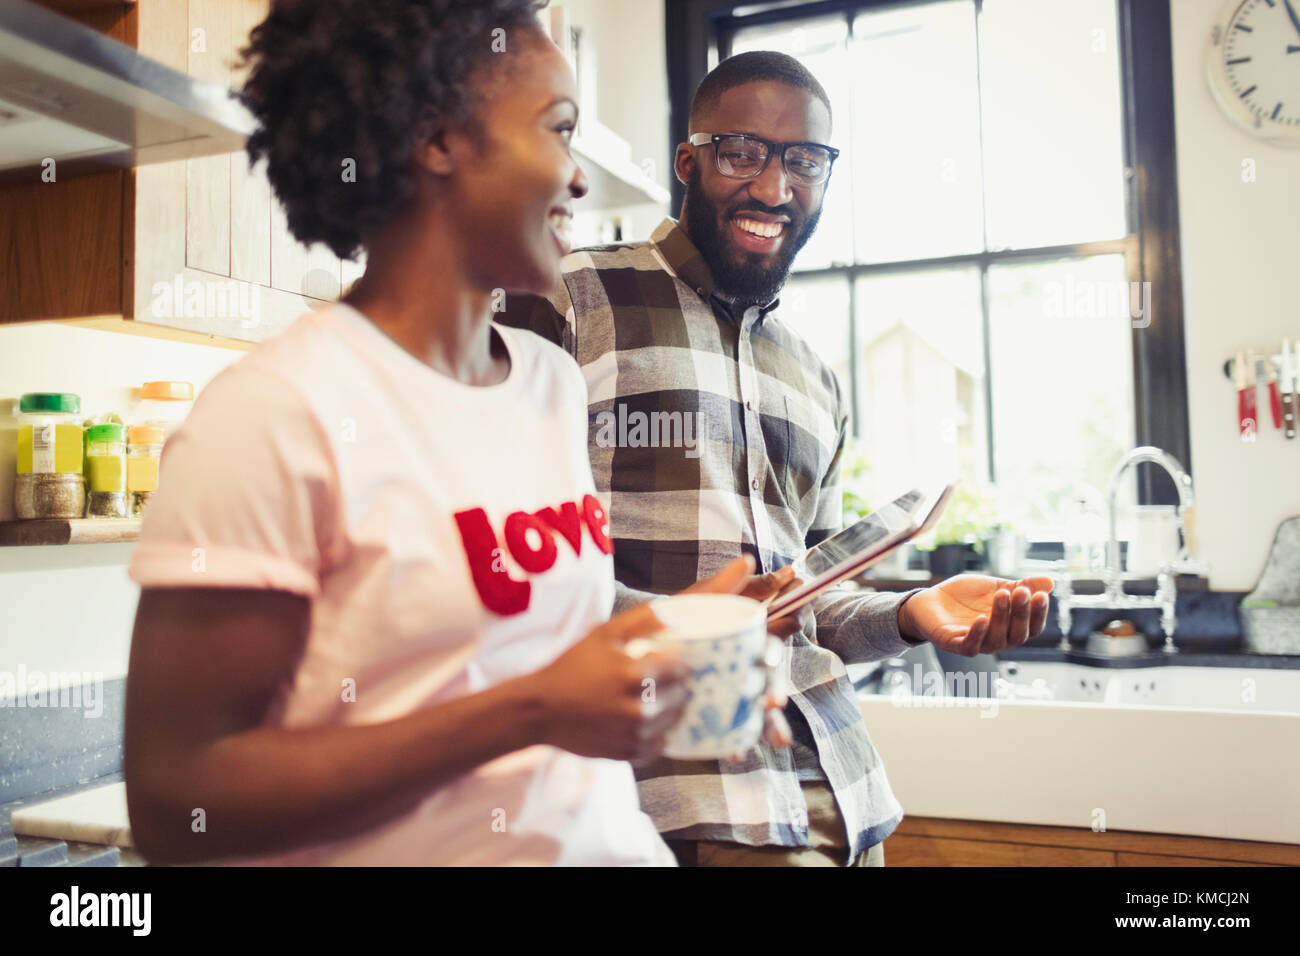 Young couple drinking coffee and using digital tablet in kitchen Stock Photo